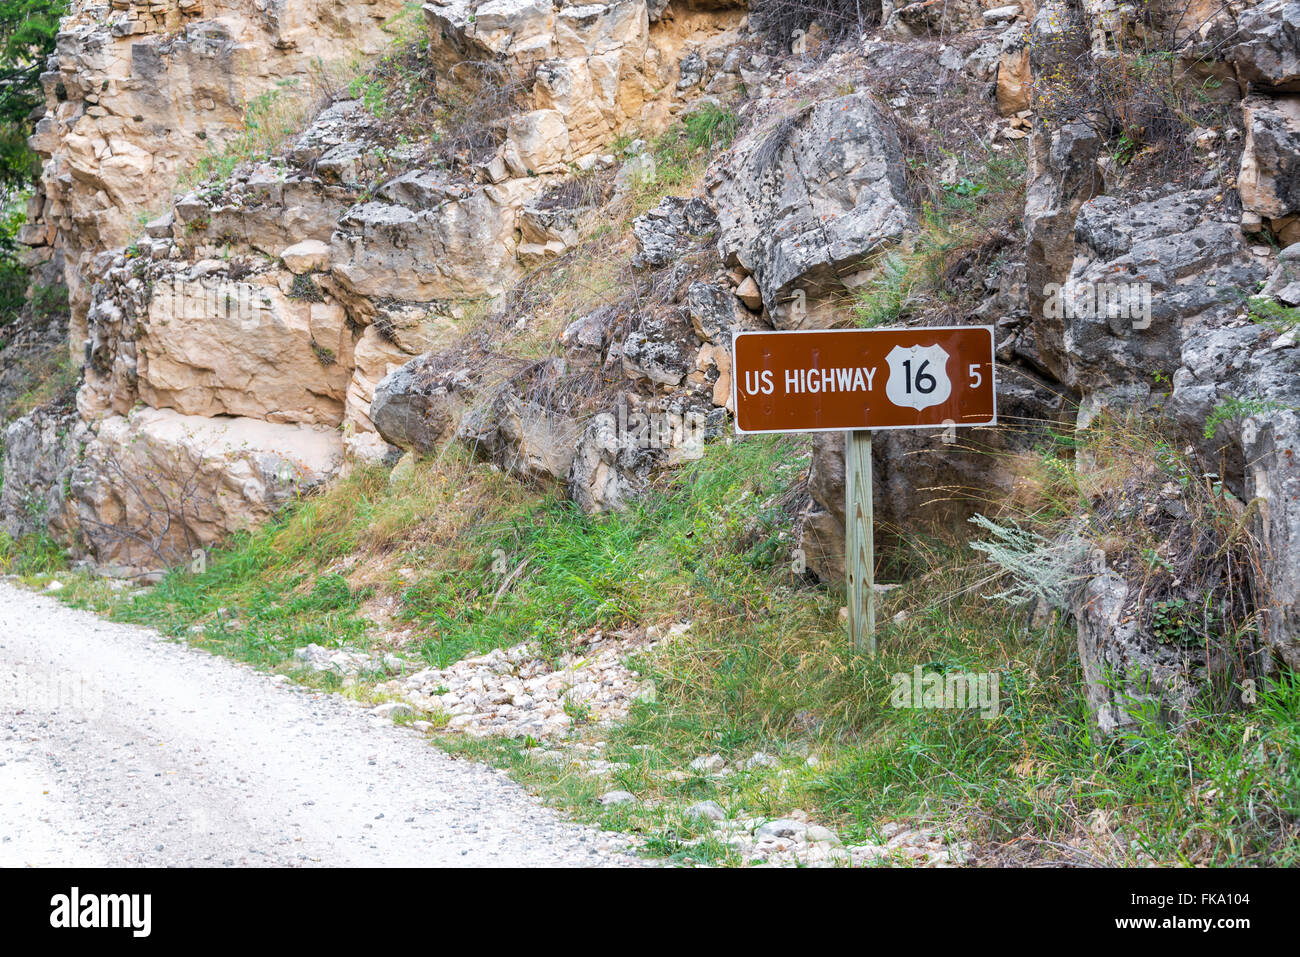 Sign on a dirt road leading to US Highway 16 near Buffalo, Wyoming Stock Photo